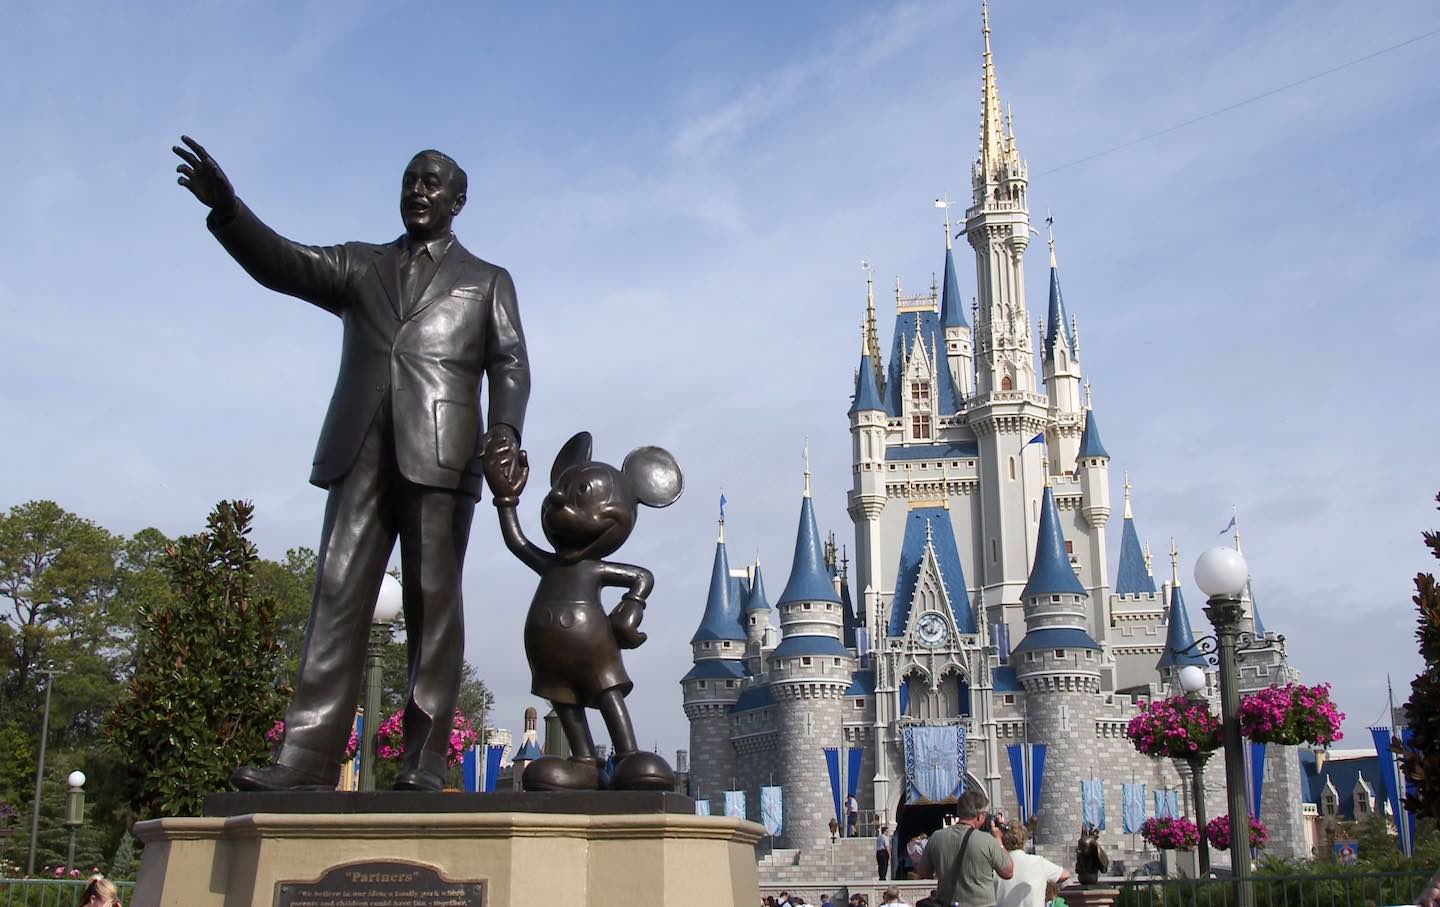 A statue of Walt Disney and Mickey Mouse